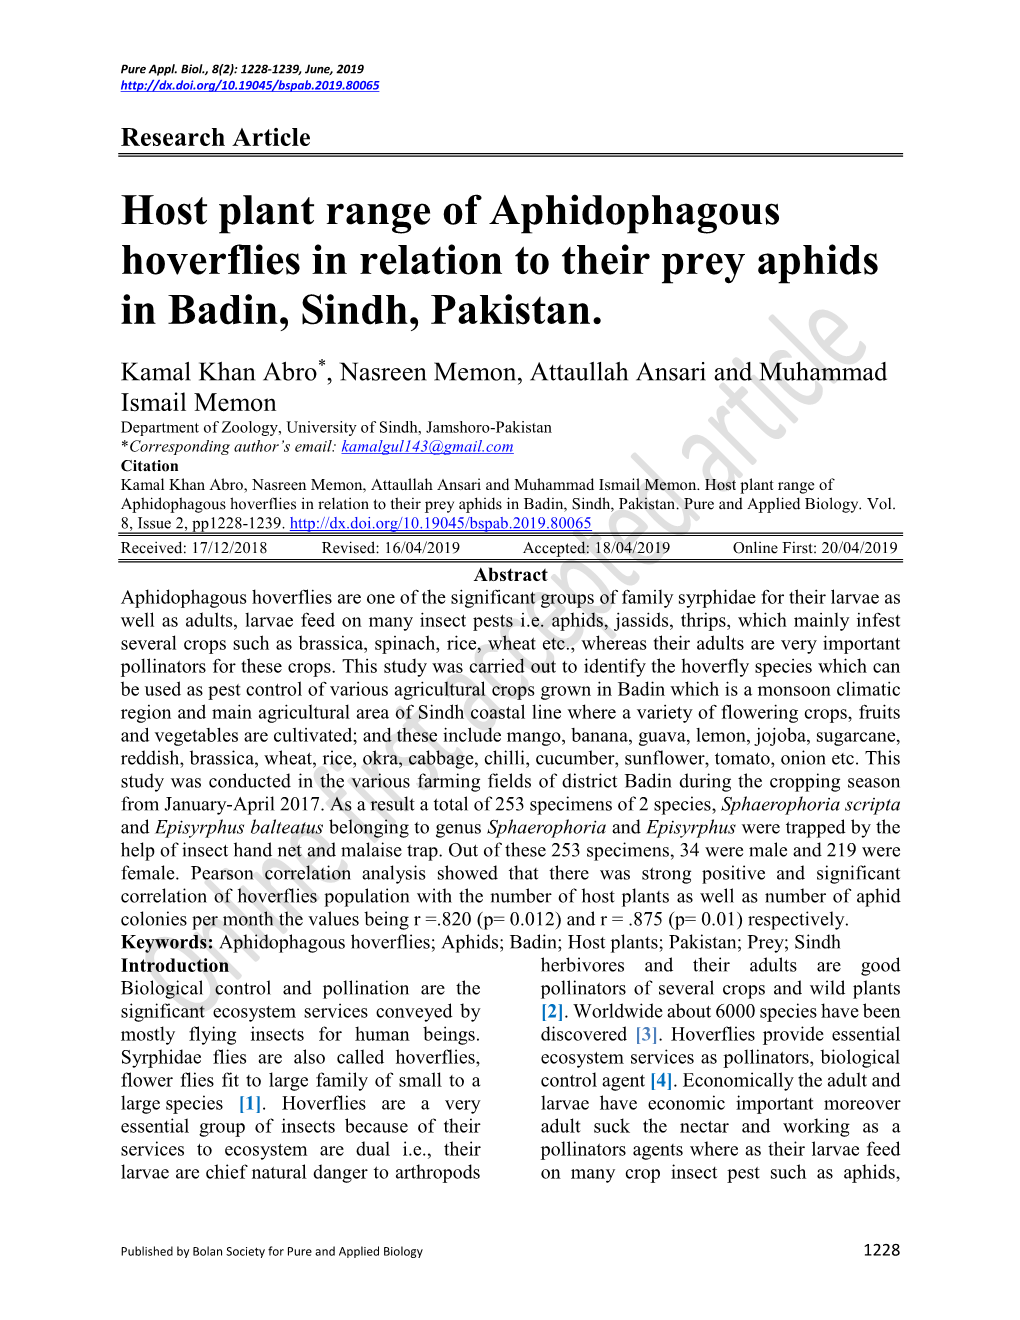 Host Plant Range of Aphidophagous Hoverflies in Relation to Their Prey Aphids in Badin, Sindh, Pakistan